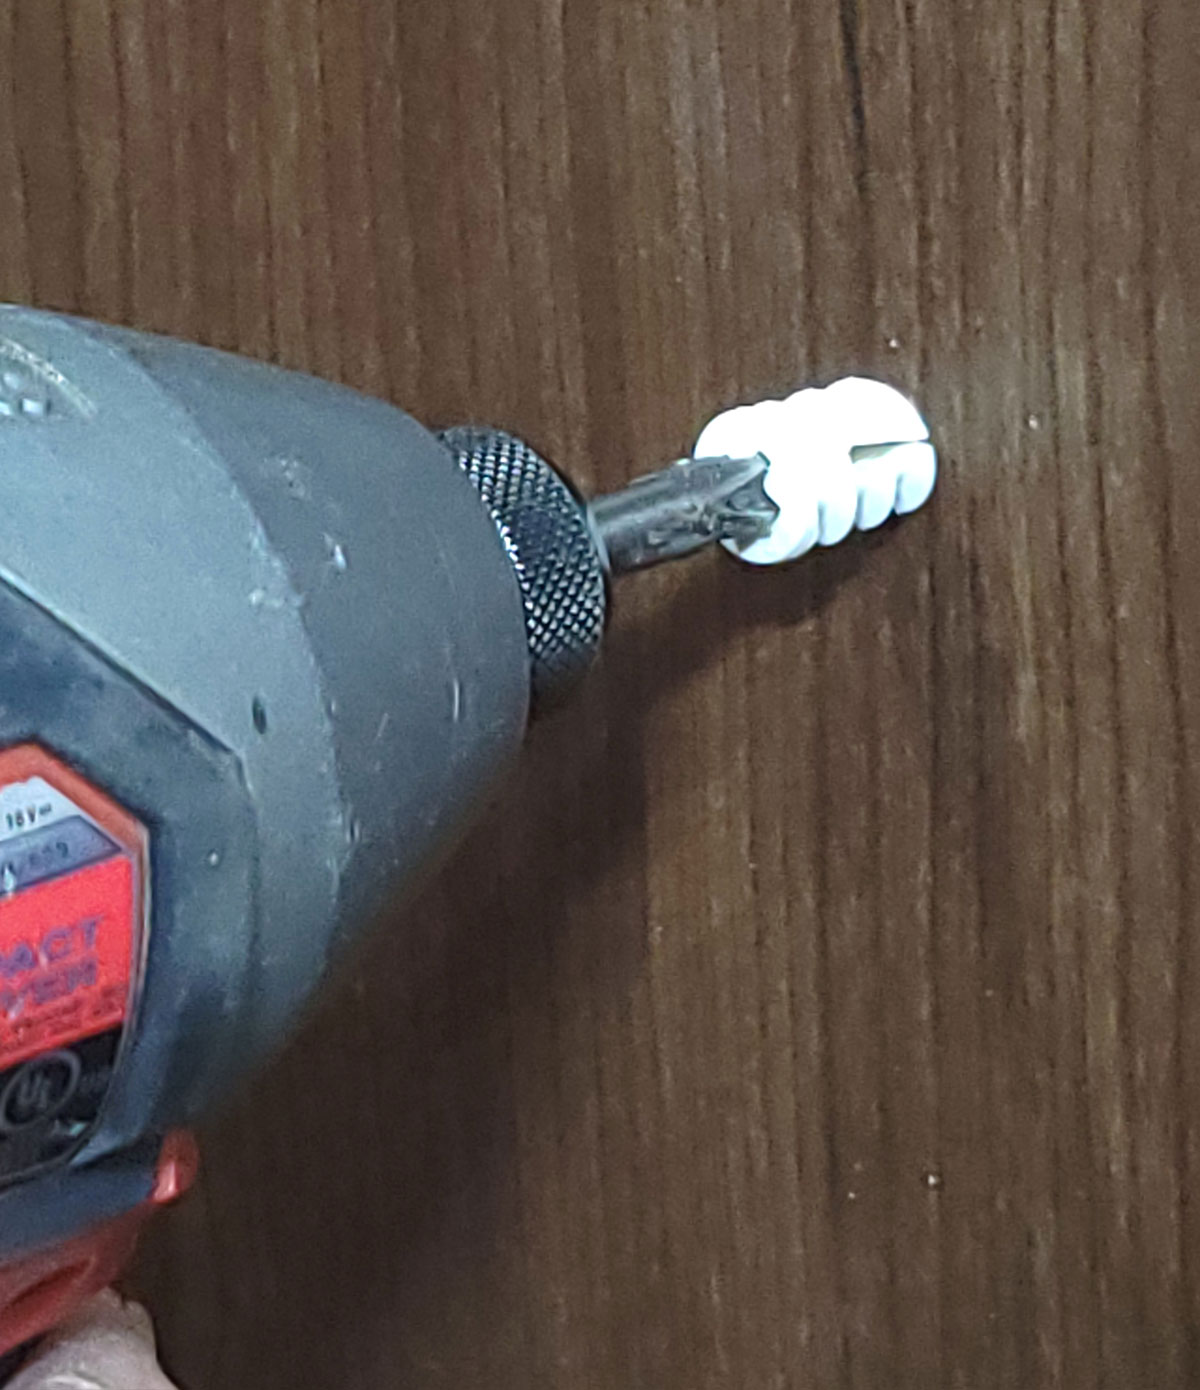 an impact driver on a low torque setting is used to start the plastic anchor